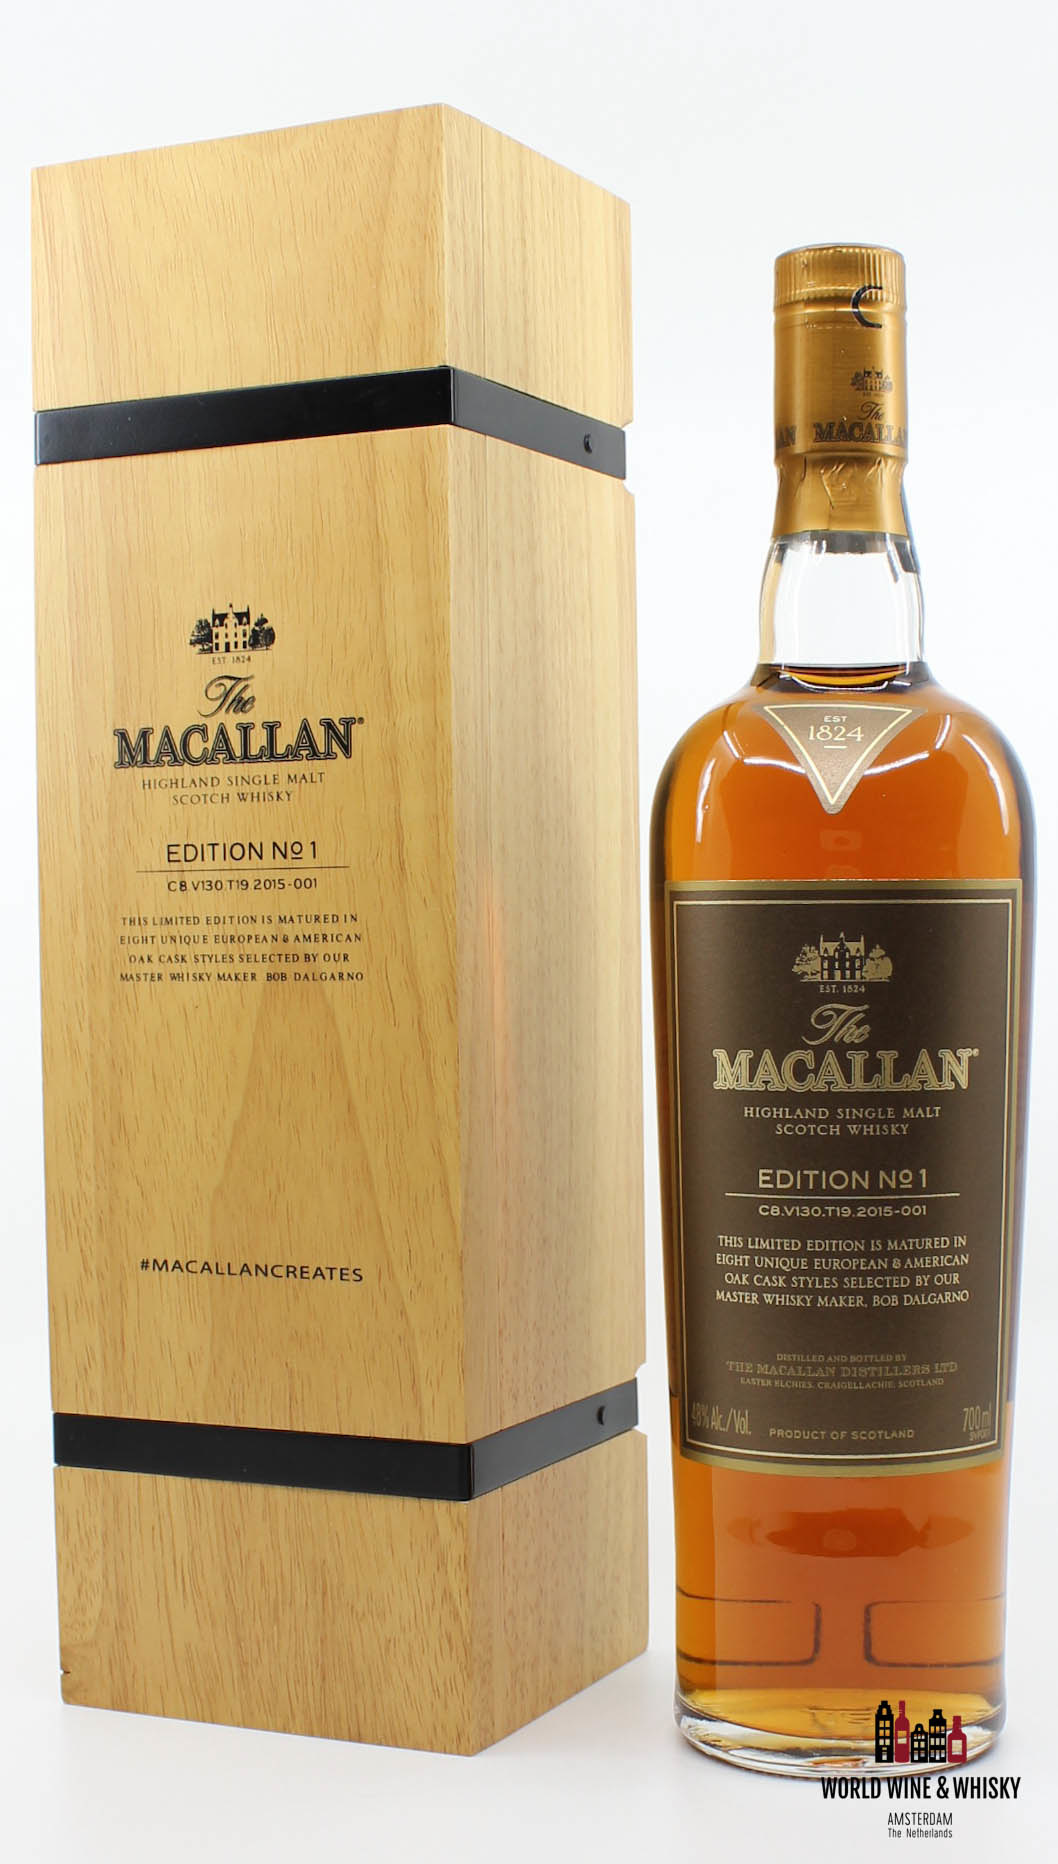 The Macallan No 1 Edition 2015 48 In Luxury Wooden Box World Wine Whisky